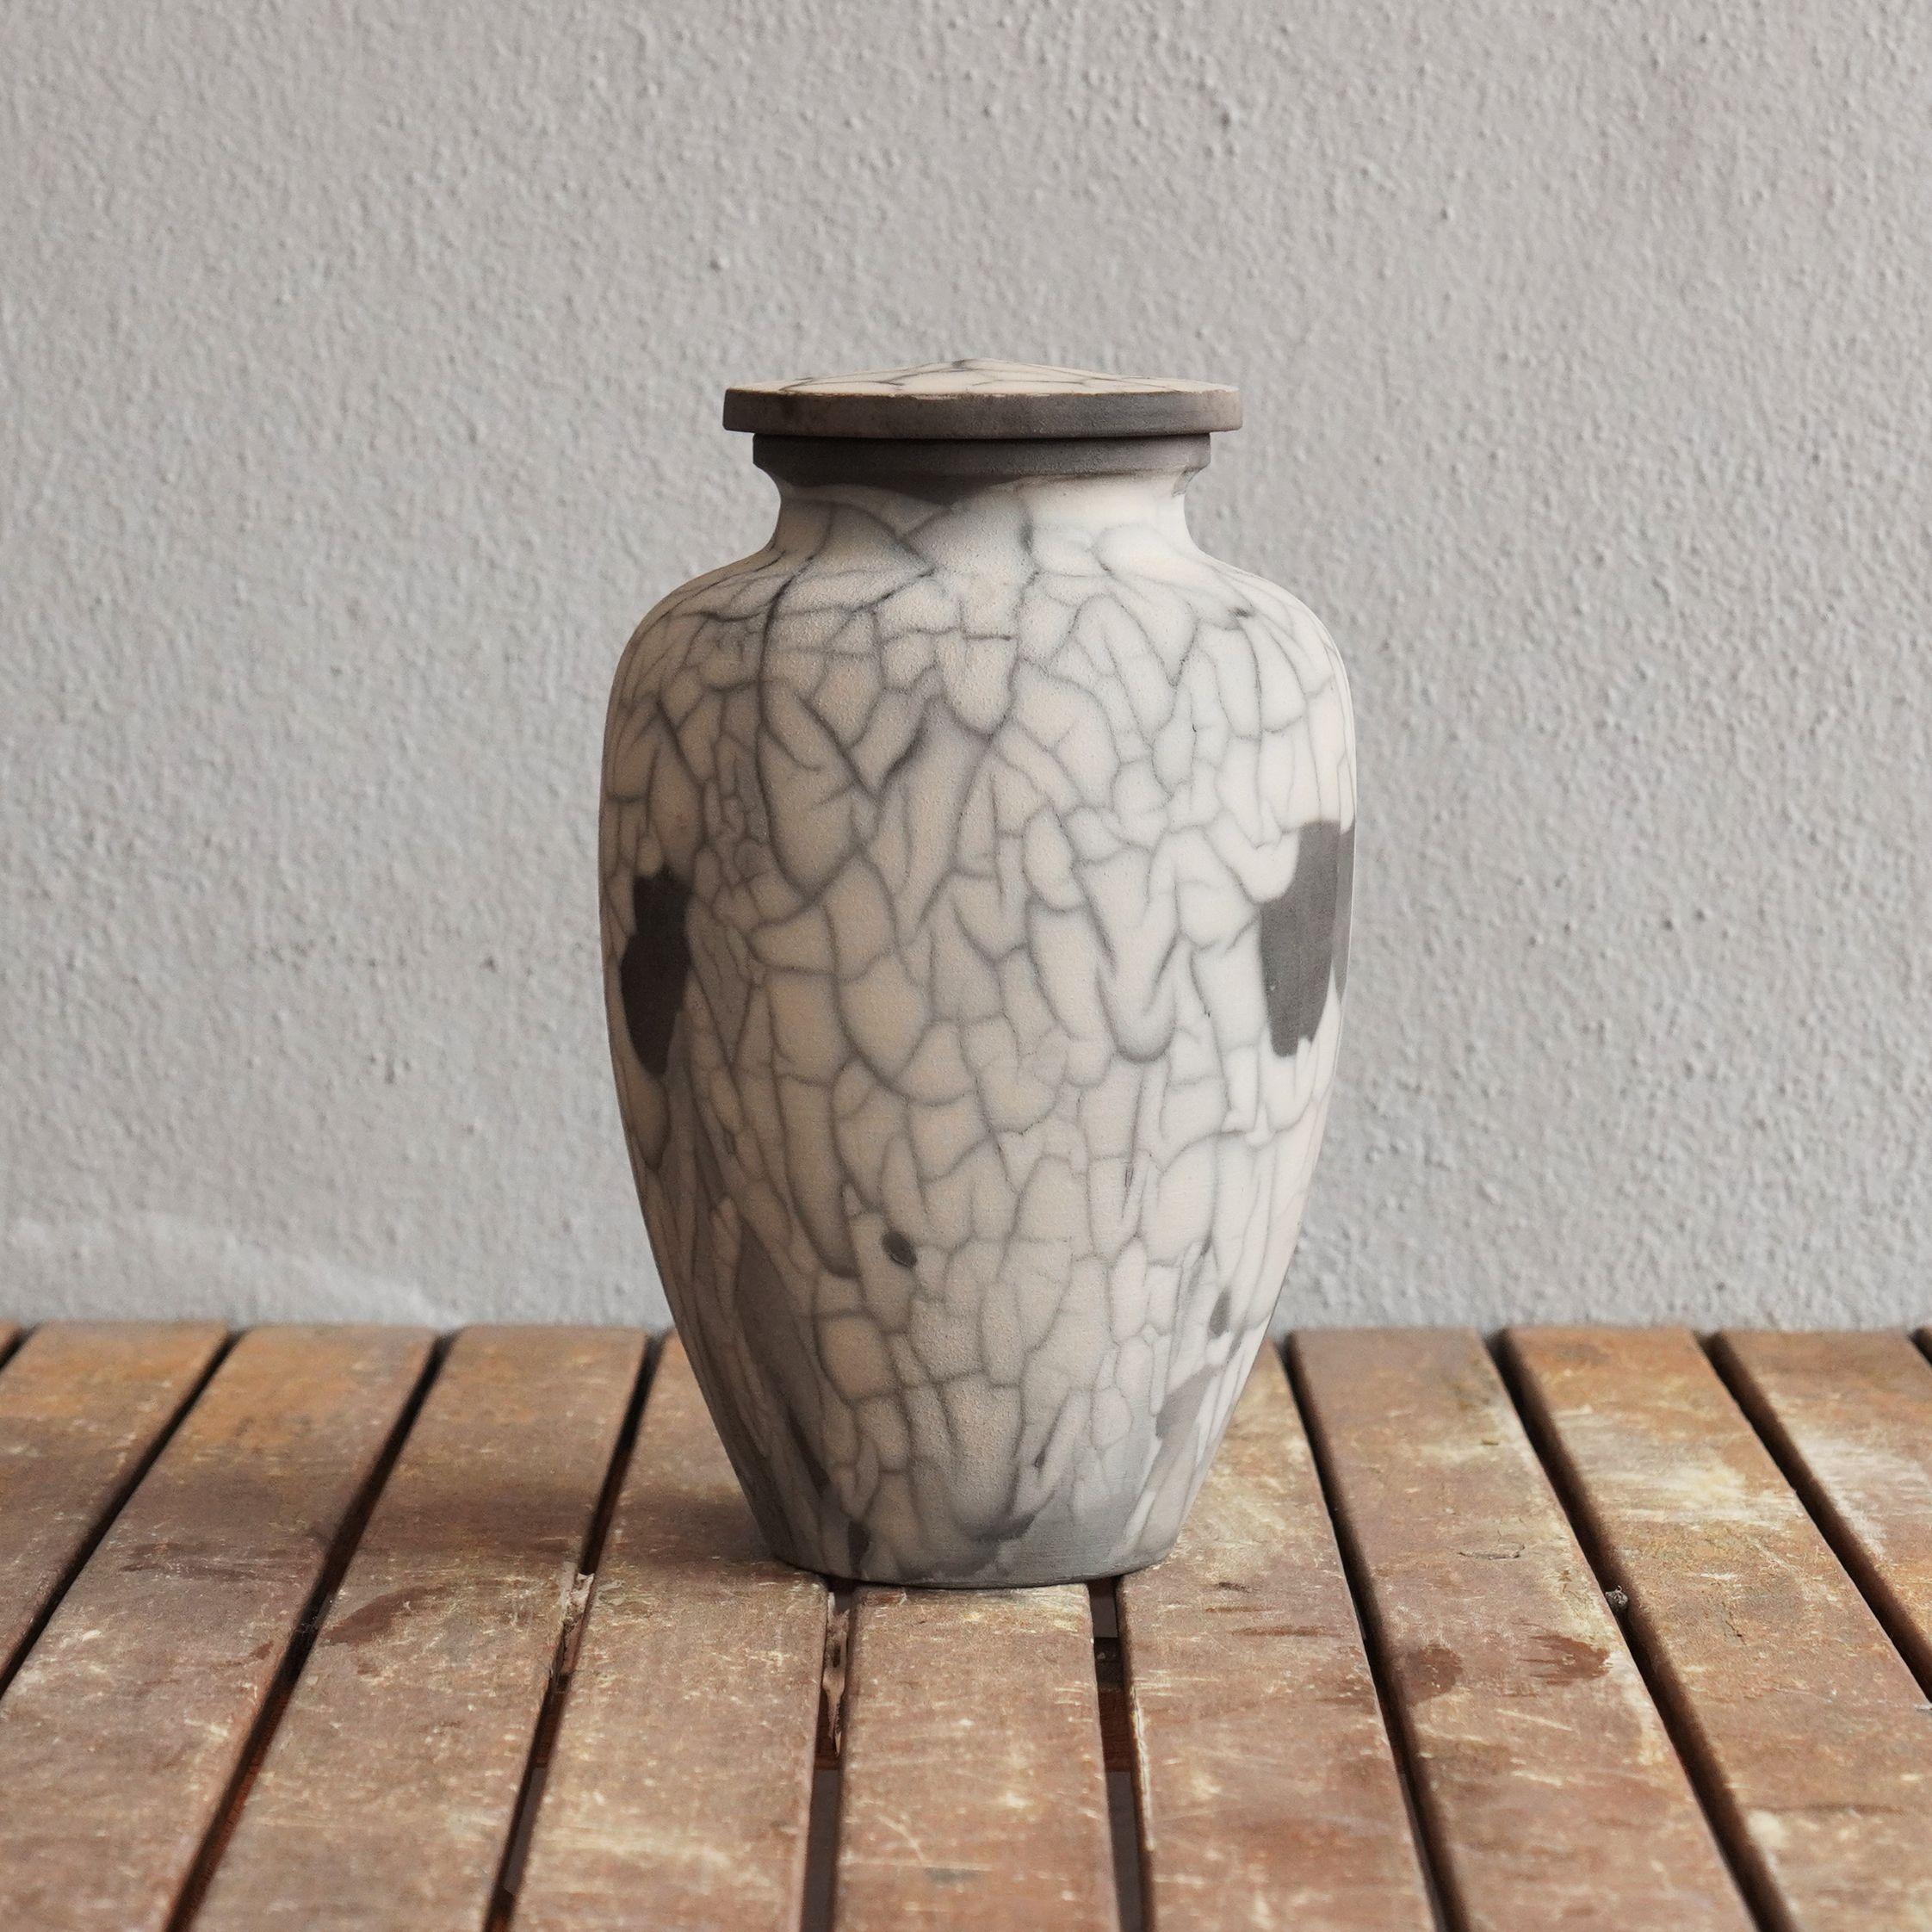 Omoide ~ (思い出) - memories
 
The passing of a loved one will always be a defining moment in a person's life. The Omoide Urn is a one of a kind ceramic piece that offers a focal point to reminisce on the memories left behind by your loved one.

Each